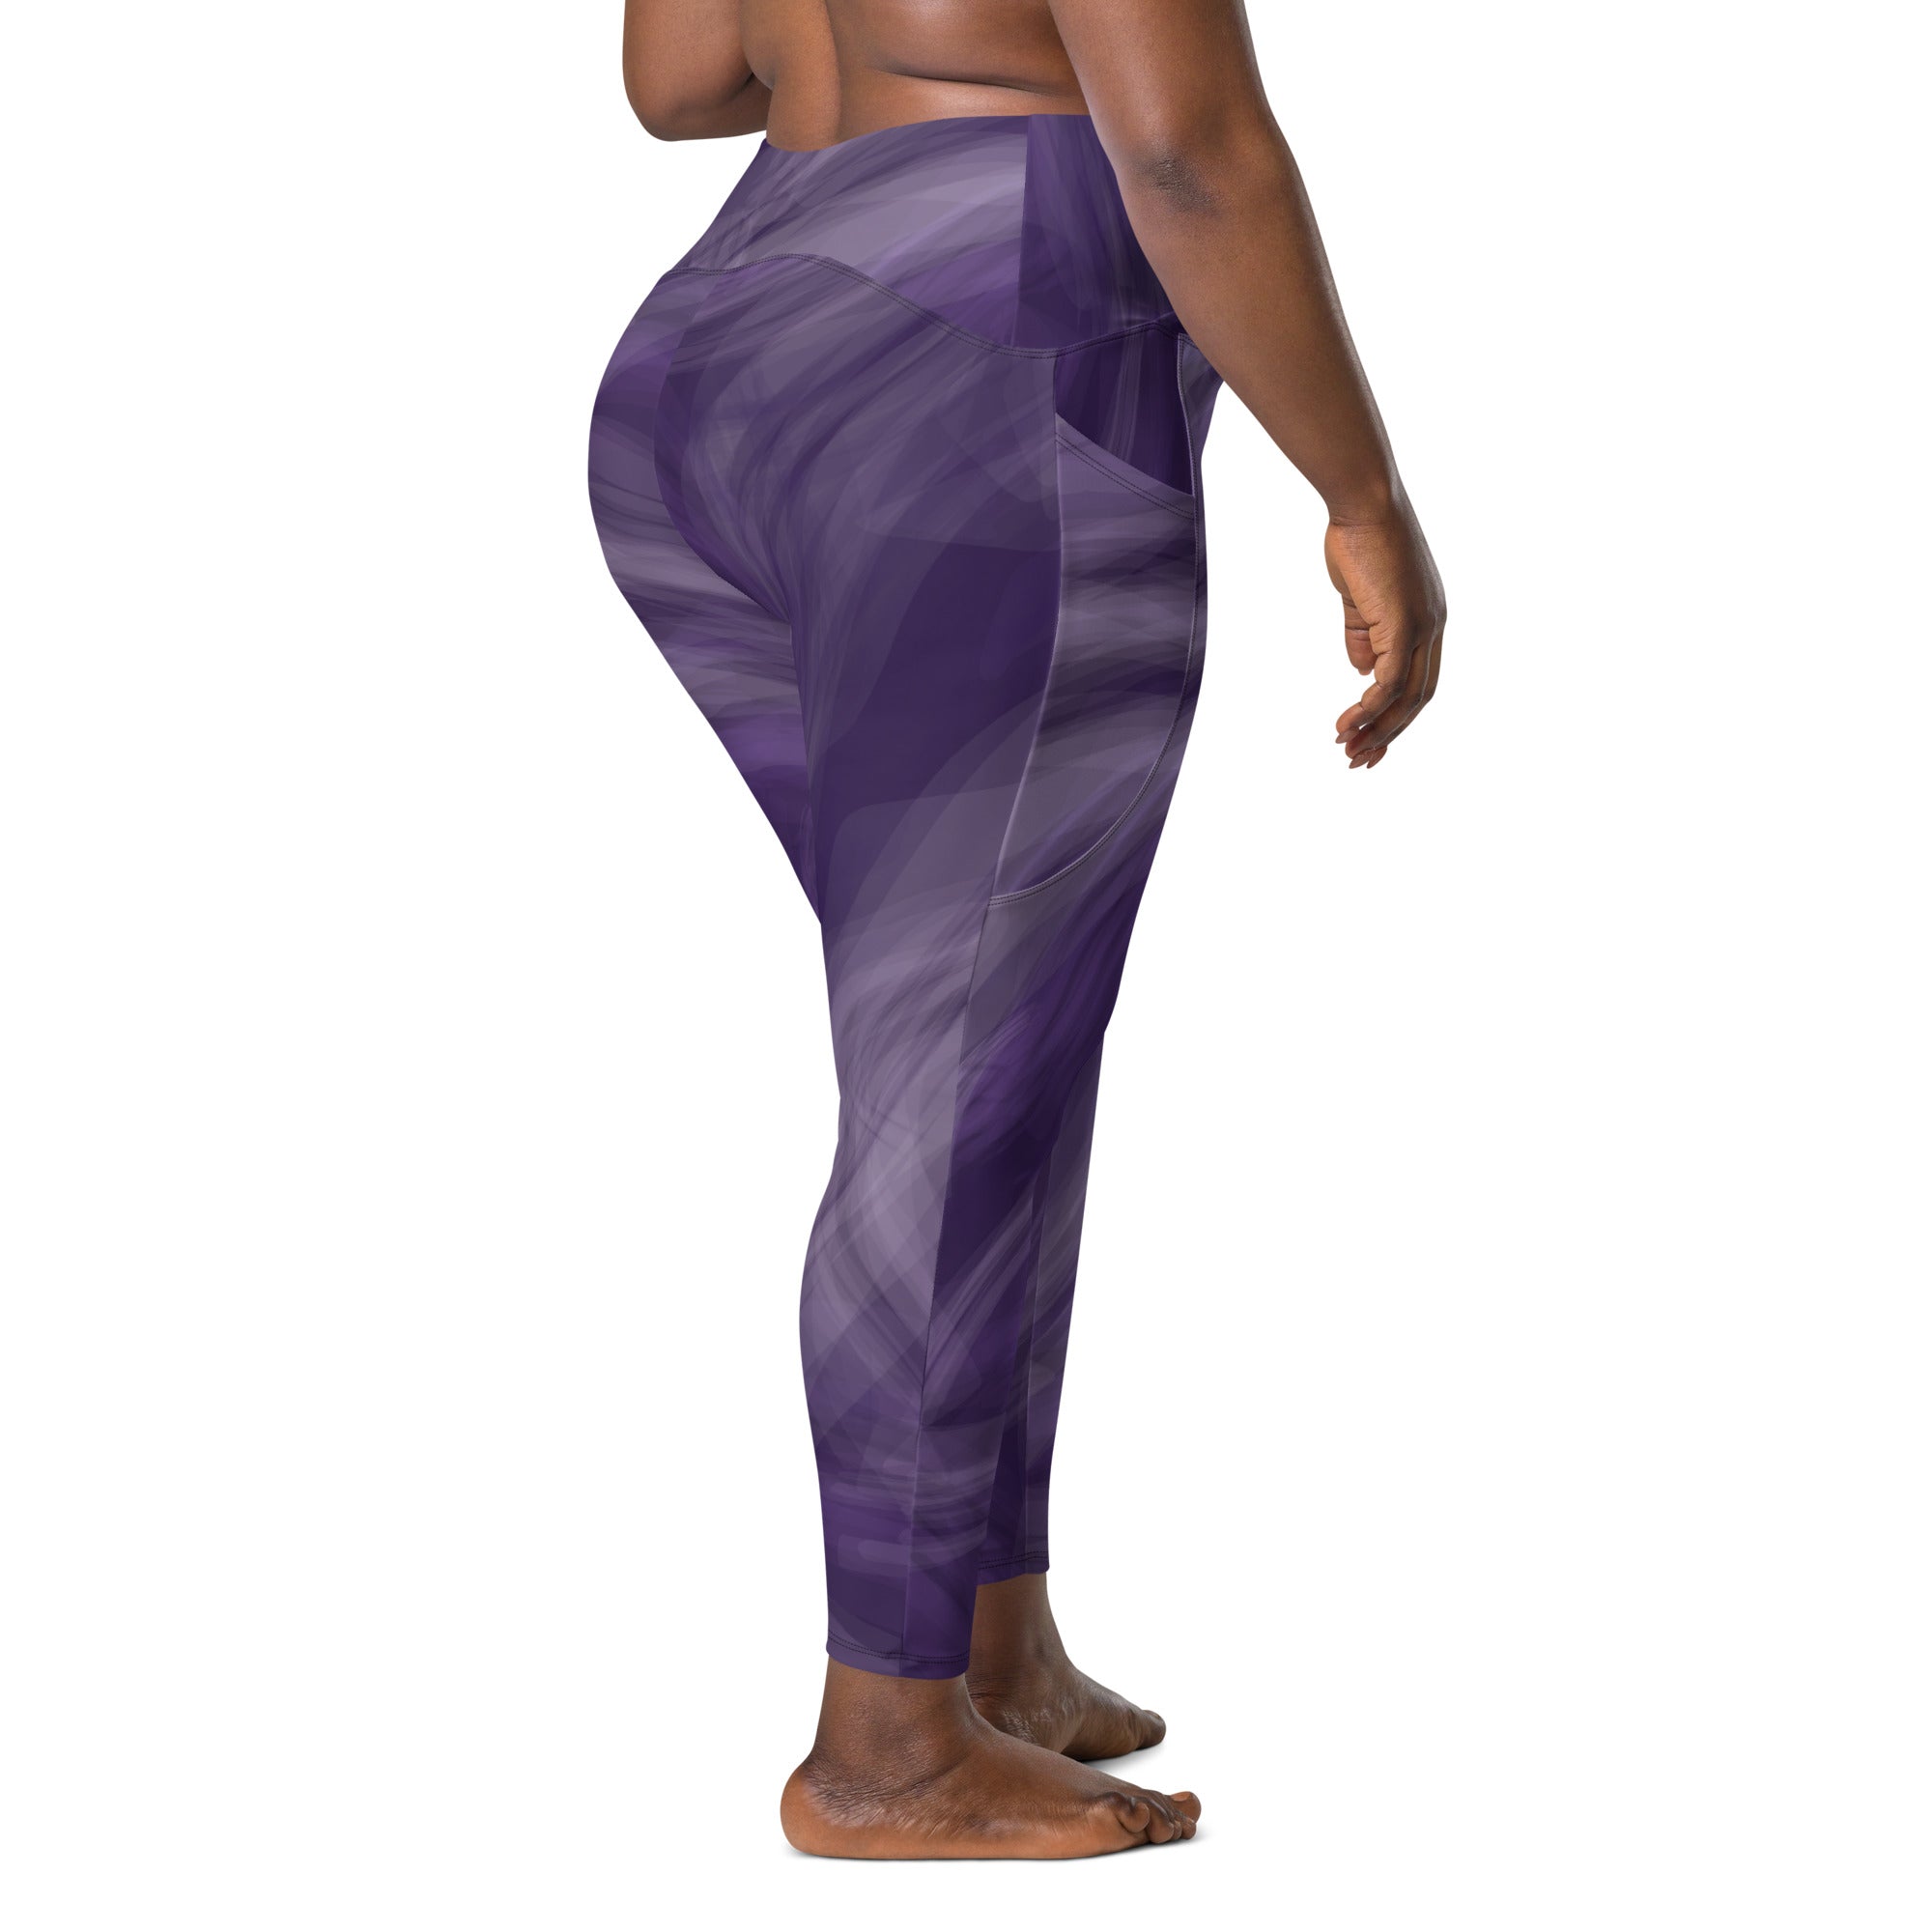 Amethyst Muse Plus Size Crossover Leggings with Pockets